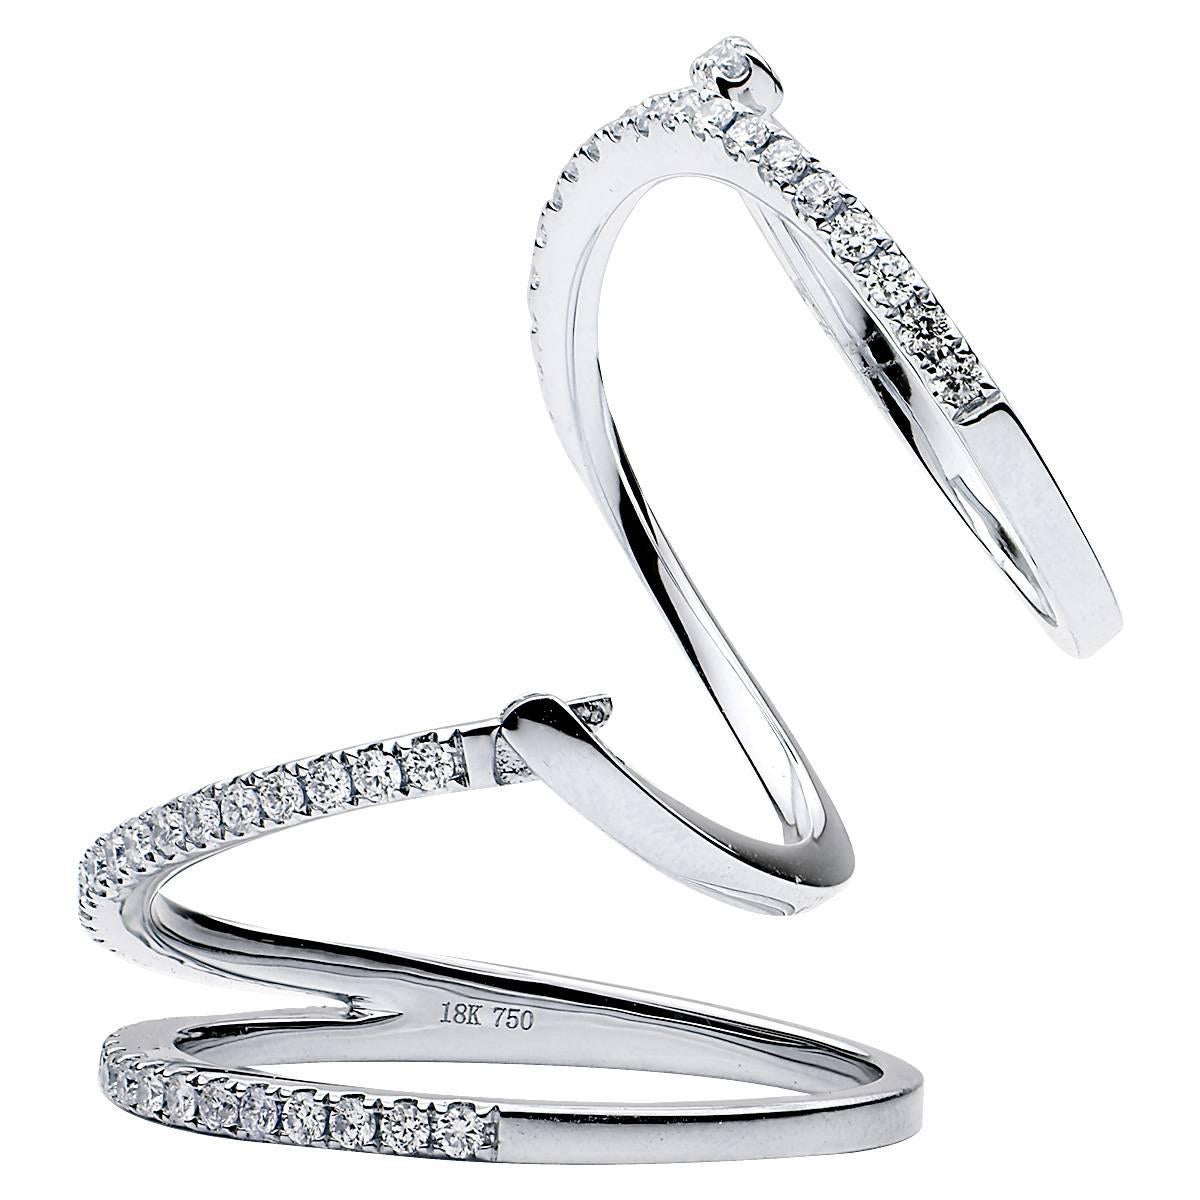 18k white gold with .71 cts. of perfectly matched white diamonds, this ring was created to fit over the knuckle and move with your finger. The ring has a well designed hinge that allows your finger to move and makes the ring appear to move in